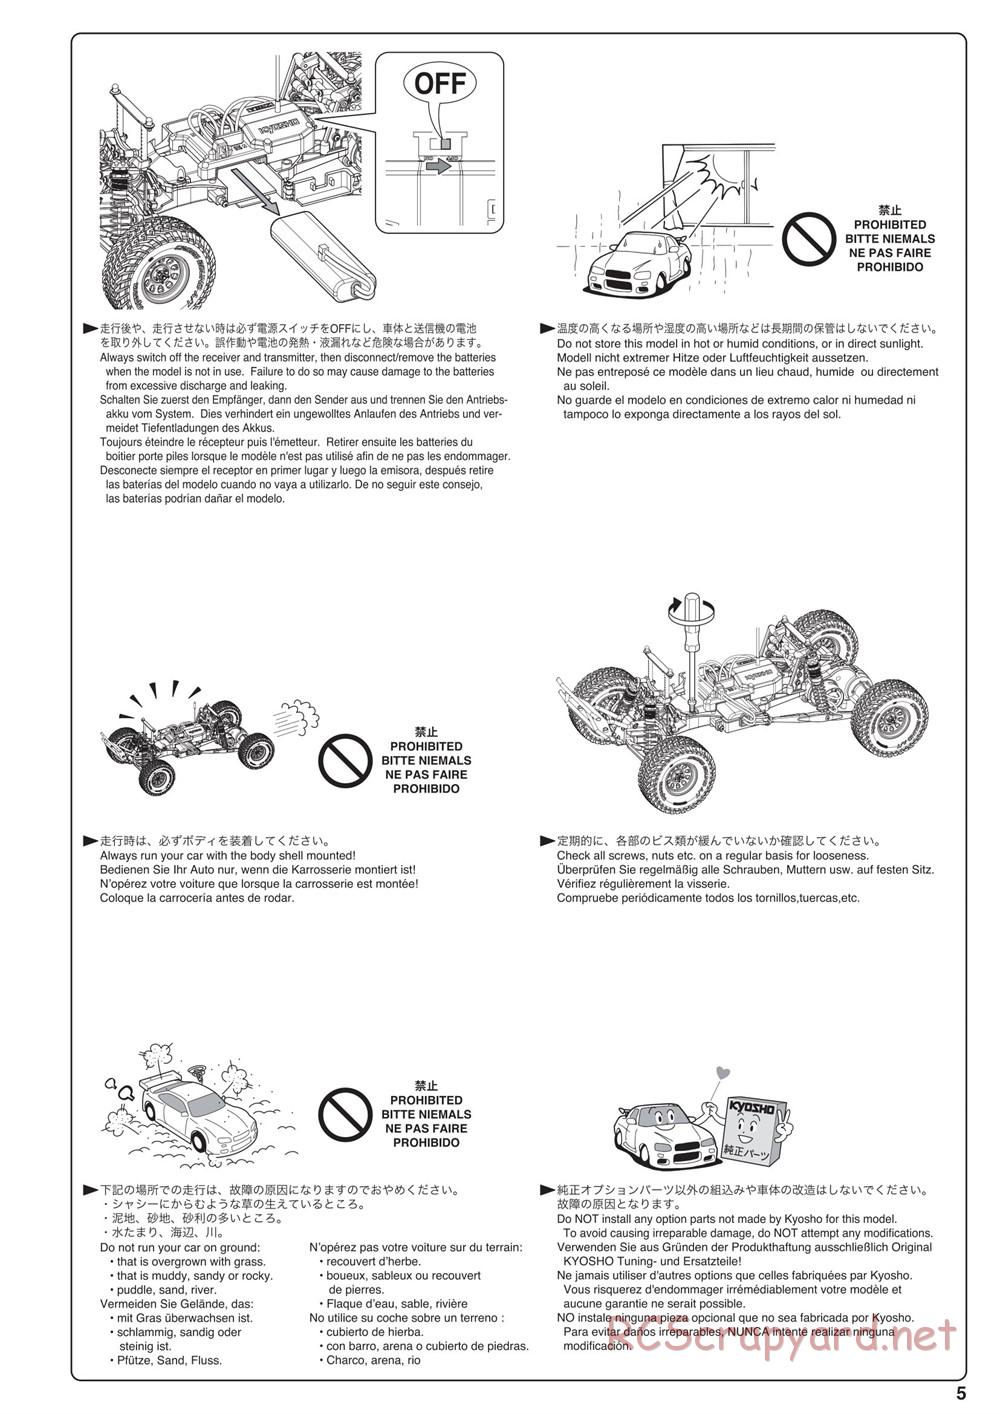 Kyosho - Outlaw Rampage - Manual - Page 5